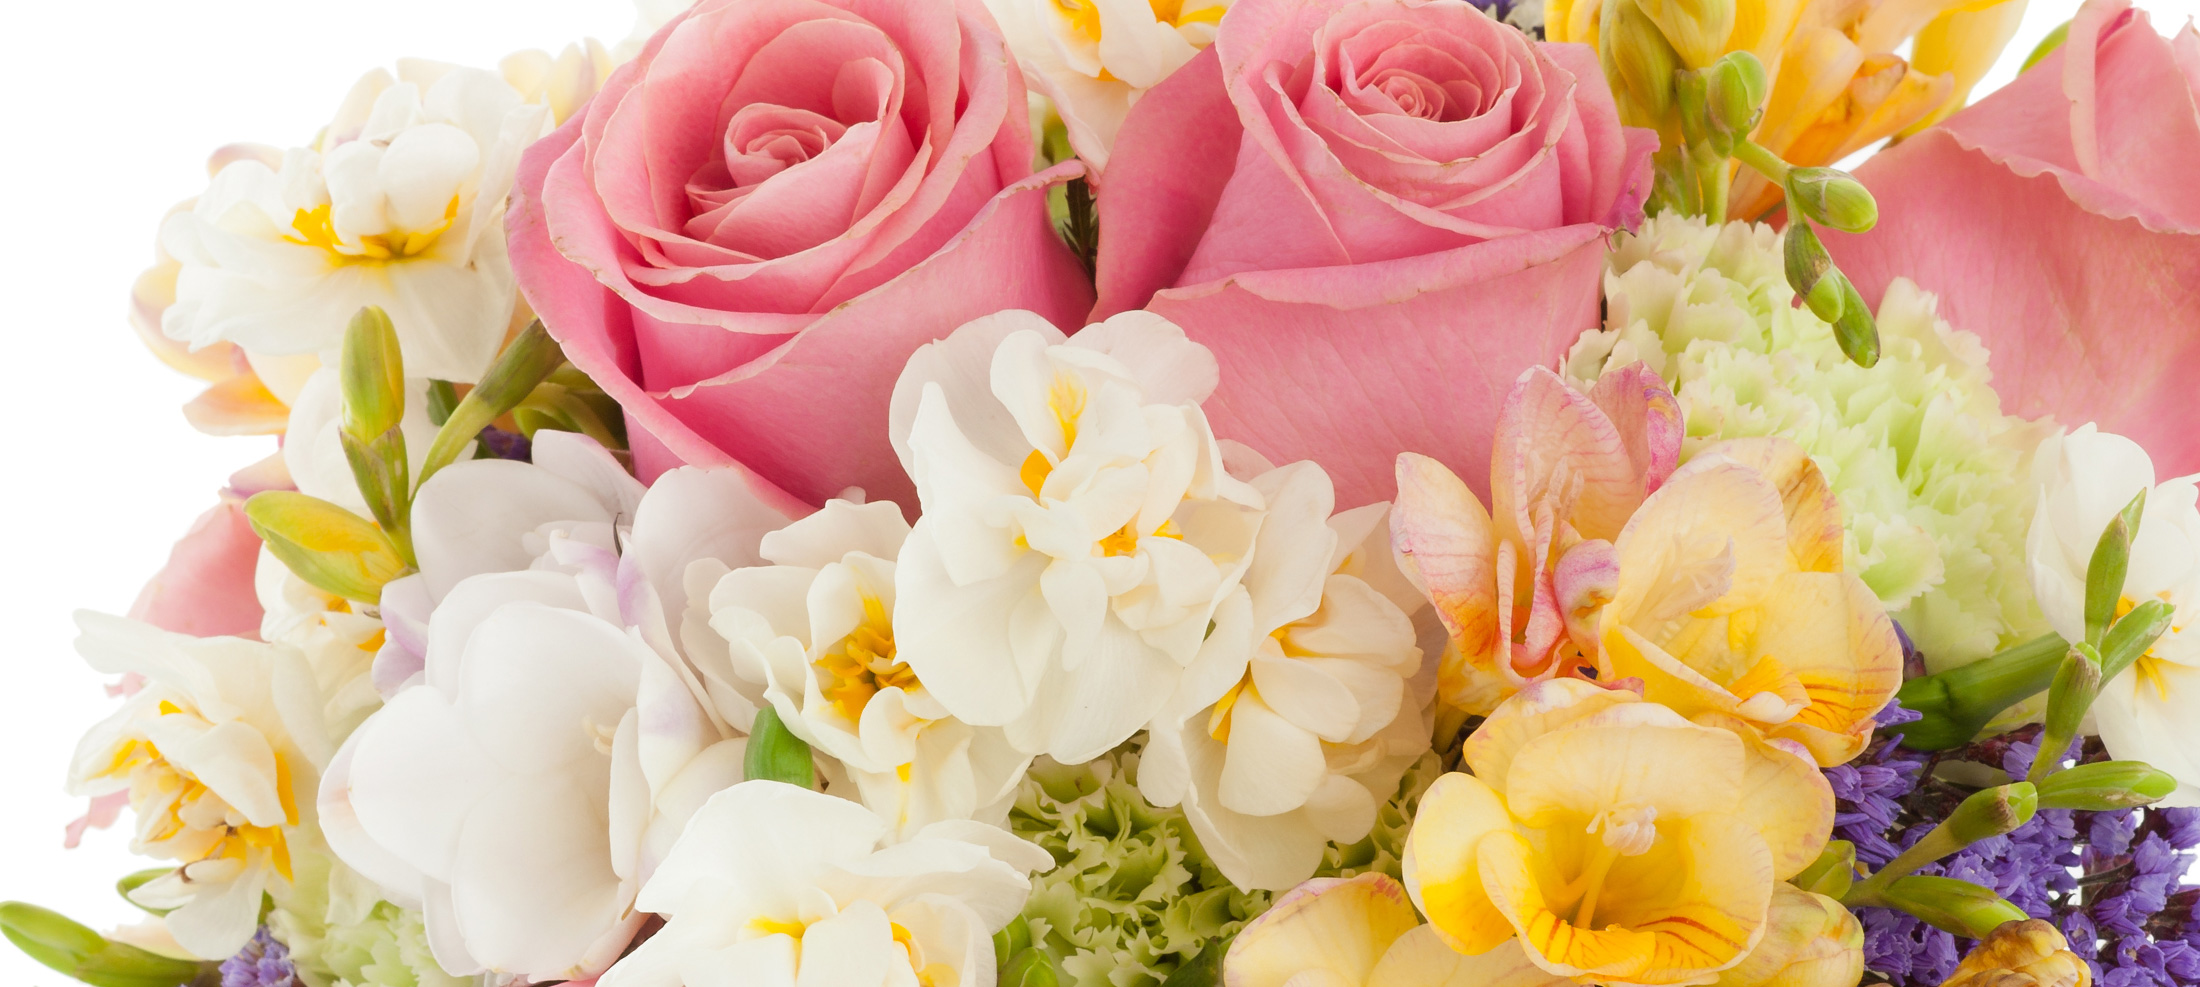 Orlando Florist | Flower Delivery by Edgewood Flowers